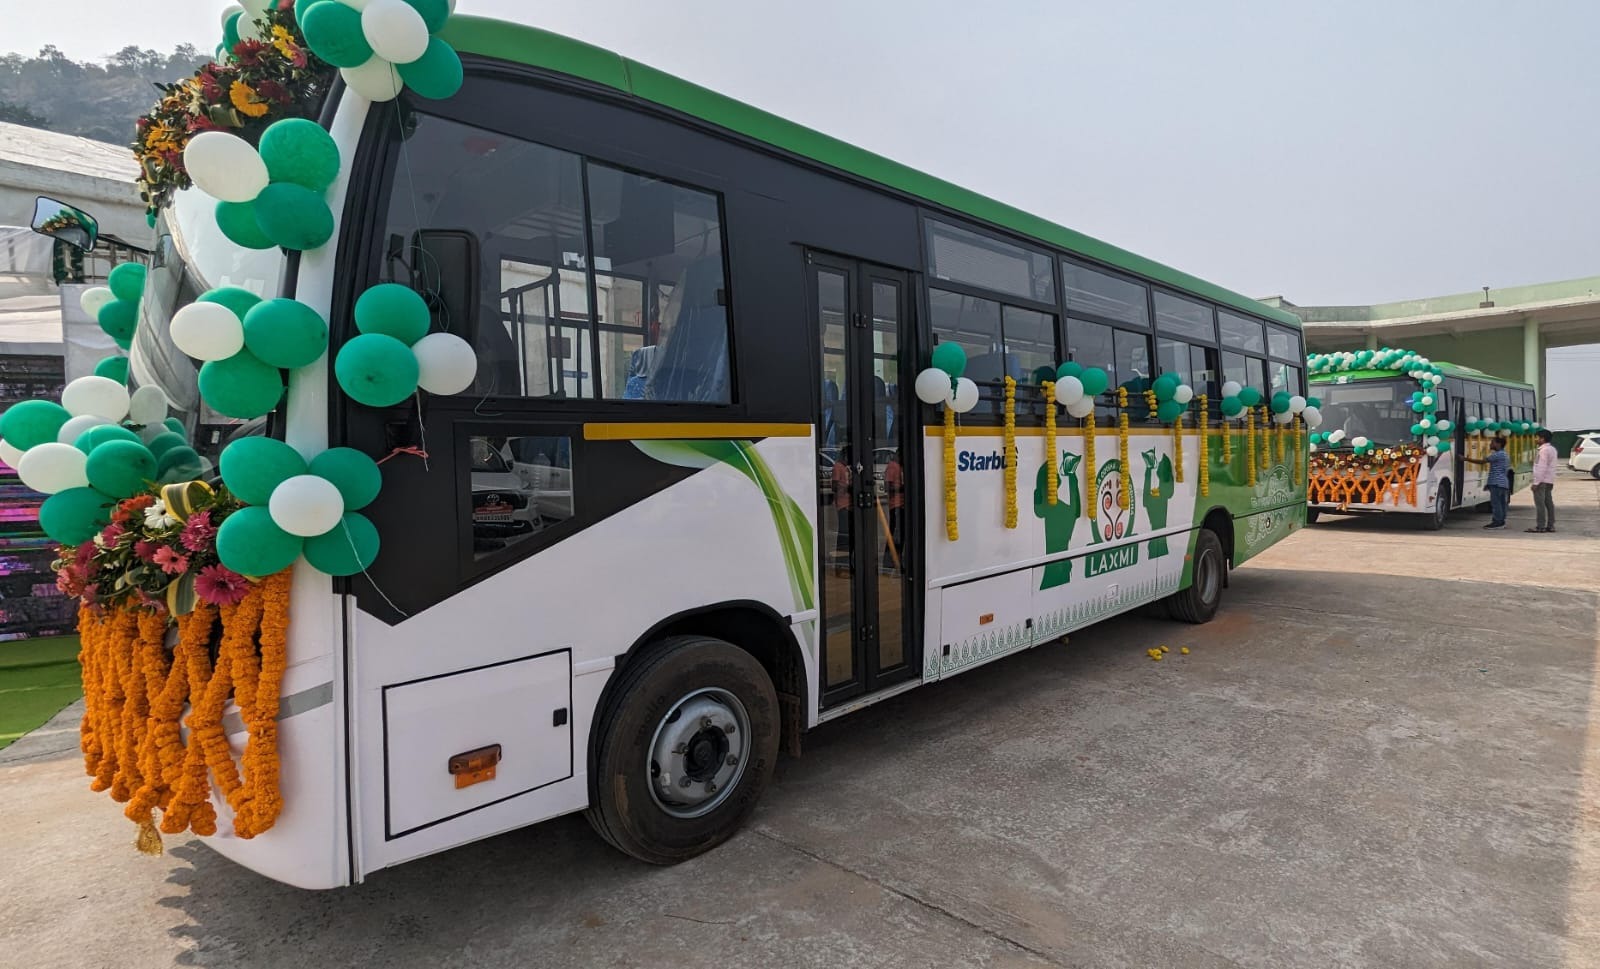 CM Launches LAccMI Bus Service in 5 More Districts
